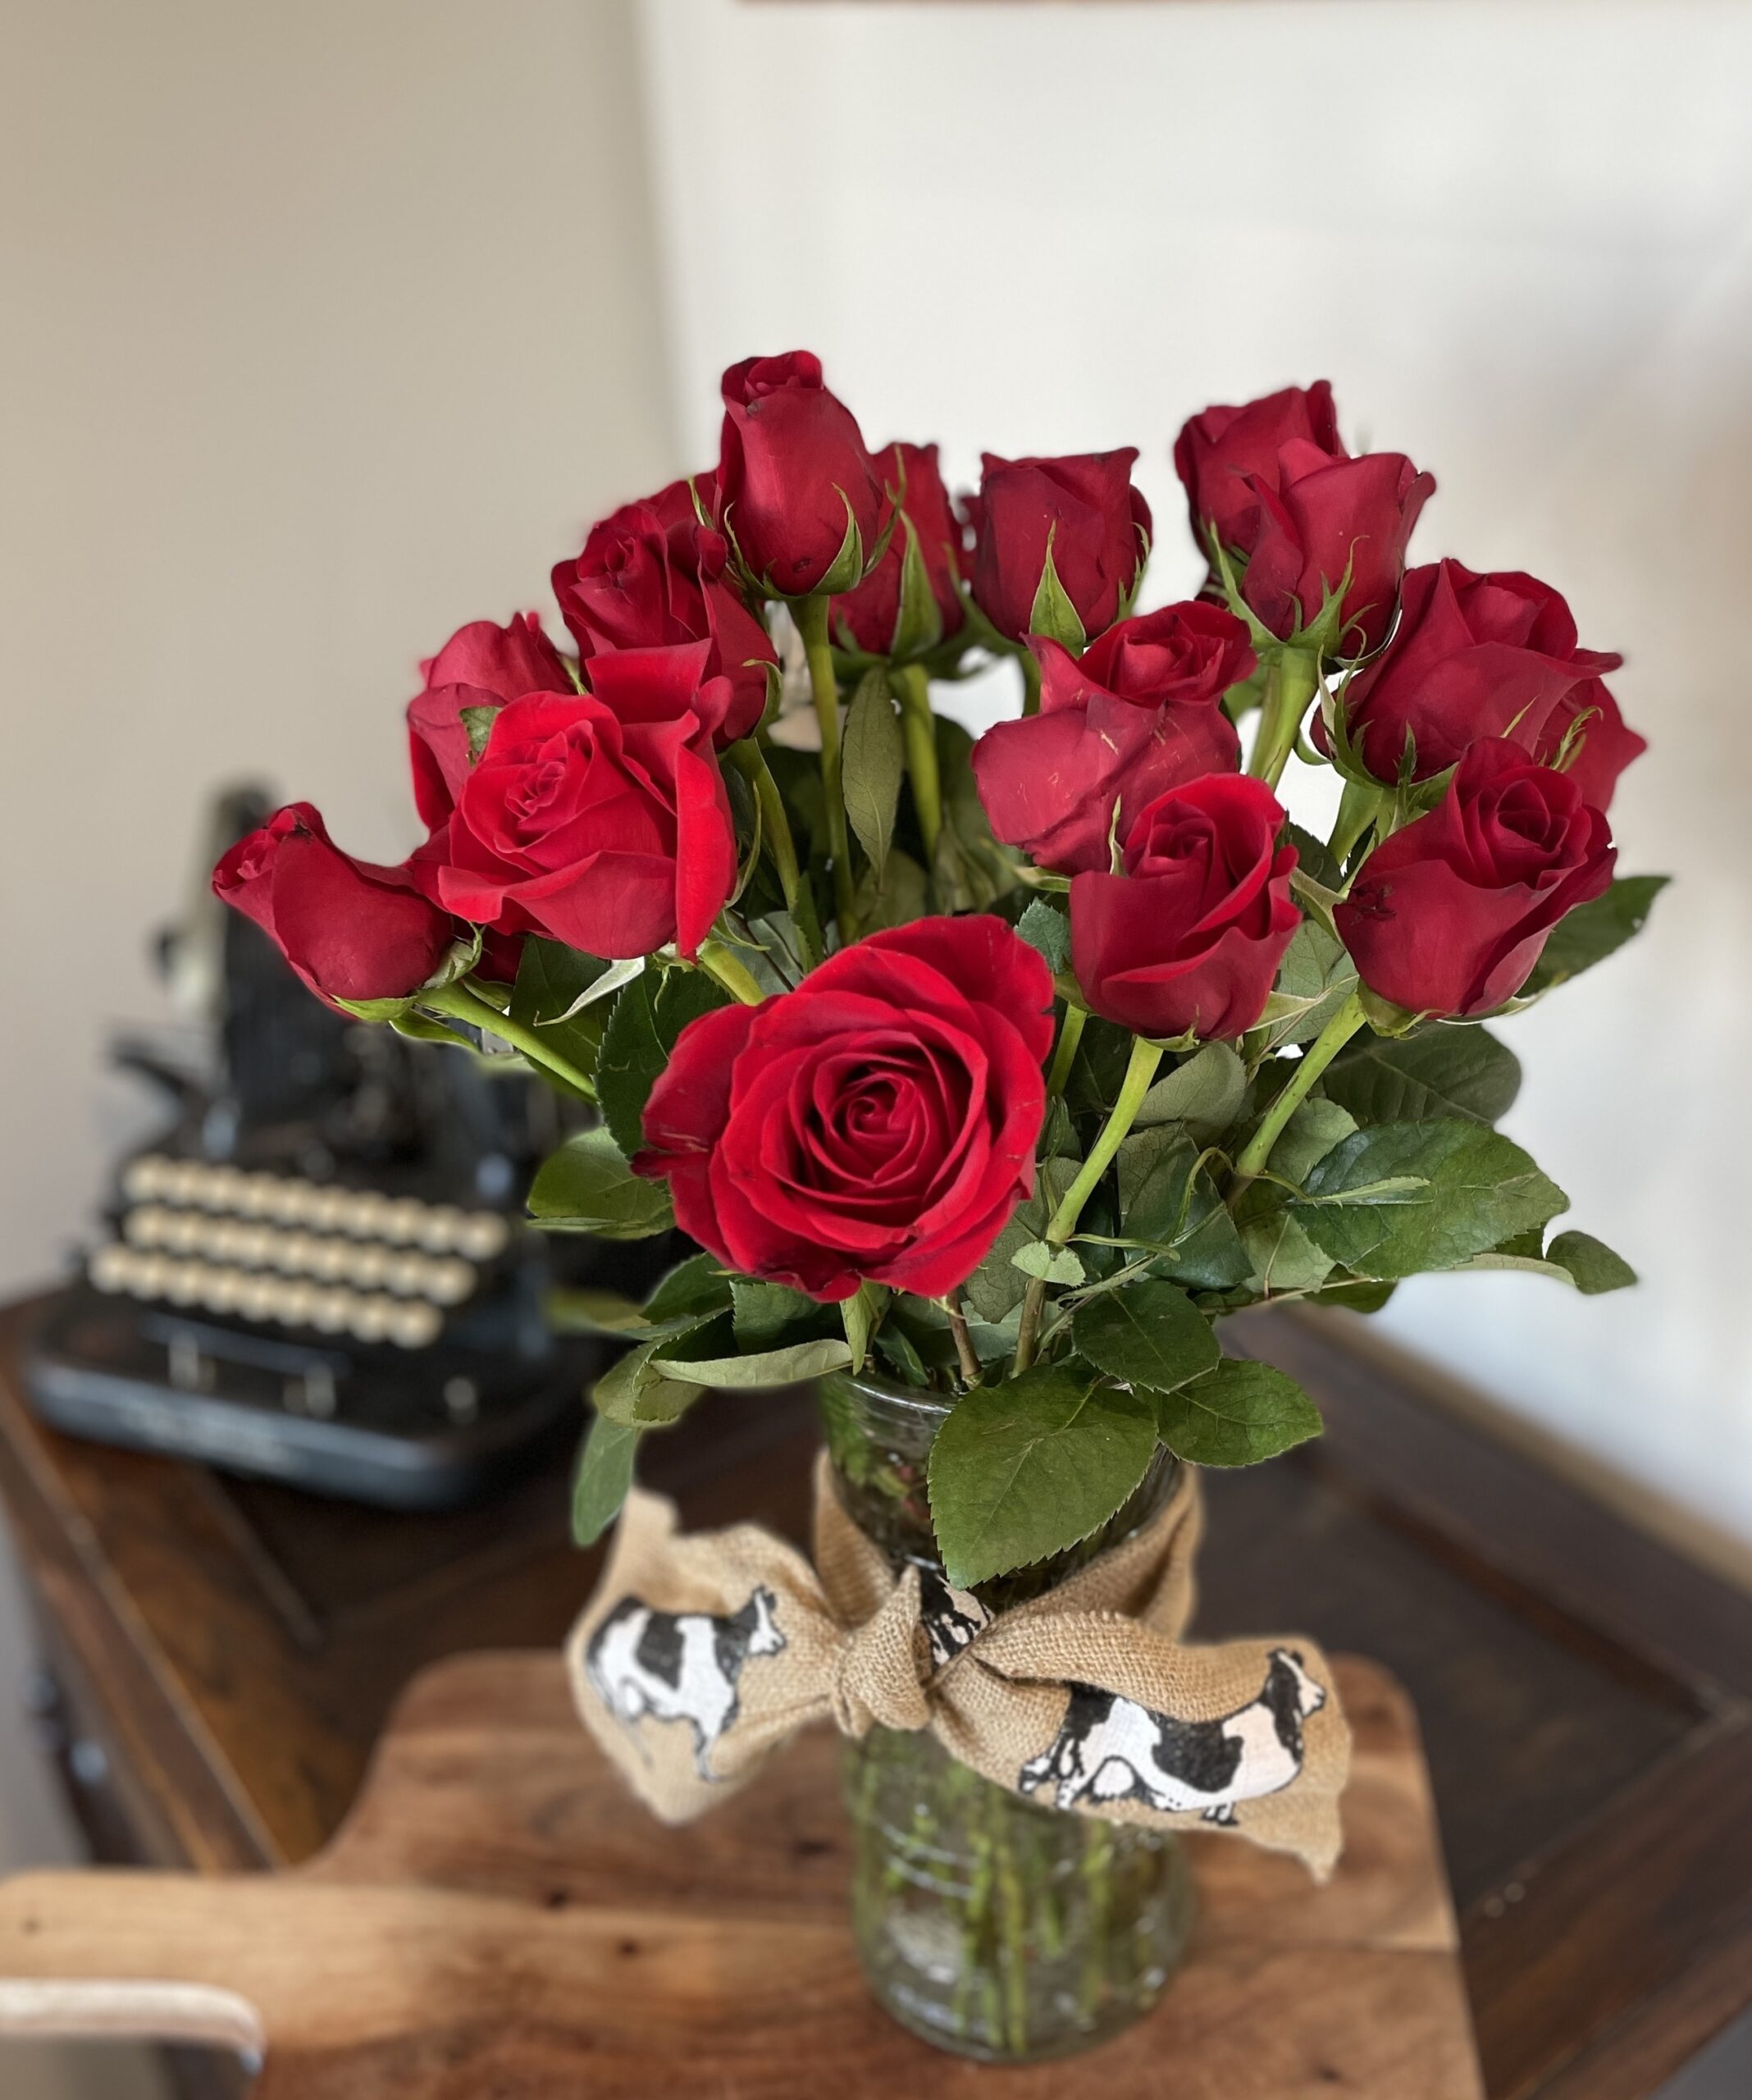 Celebrate your special event with roses